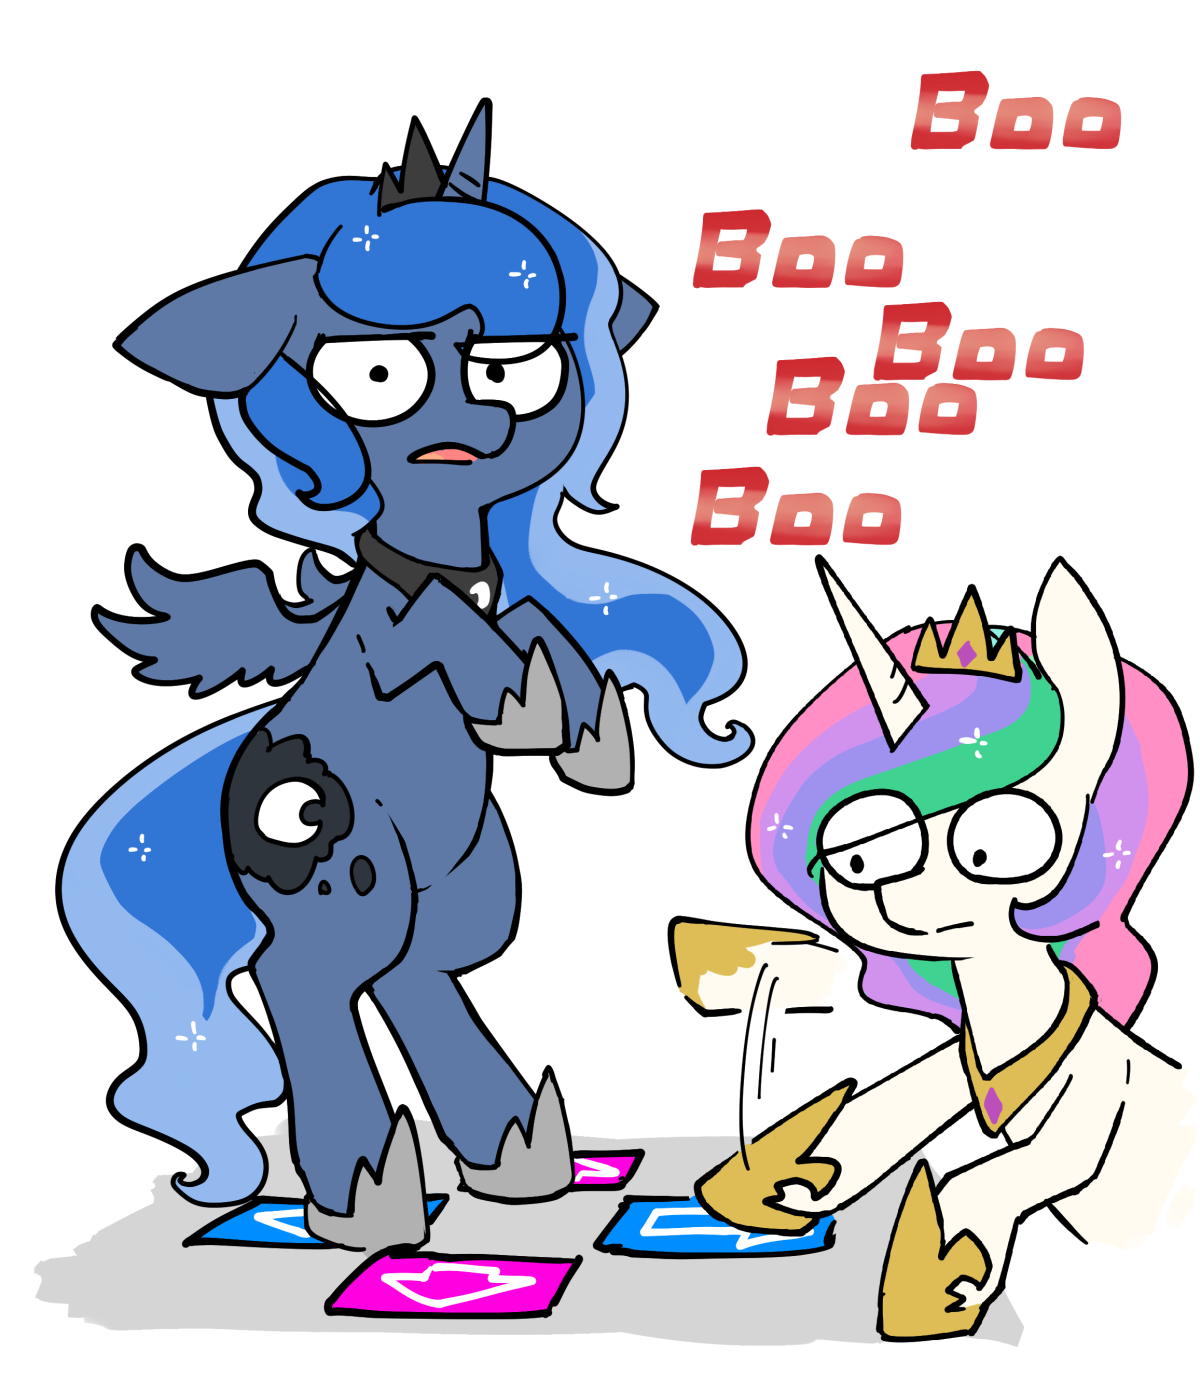 toki-reatle:  This series is a parody of Inconvenient trixie.  X3!